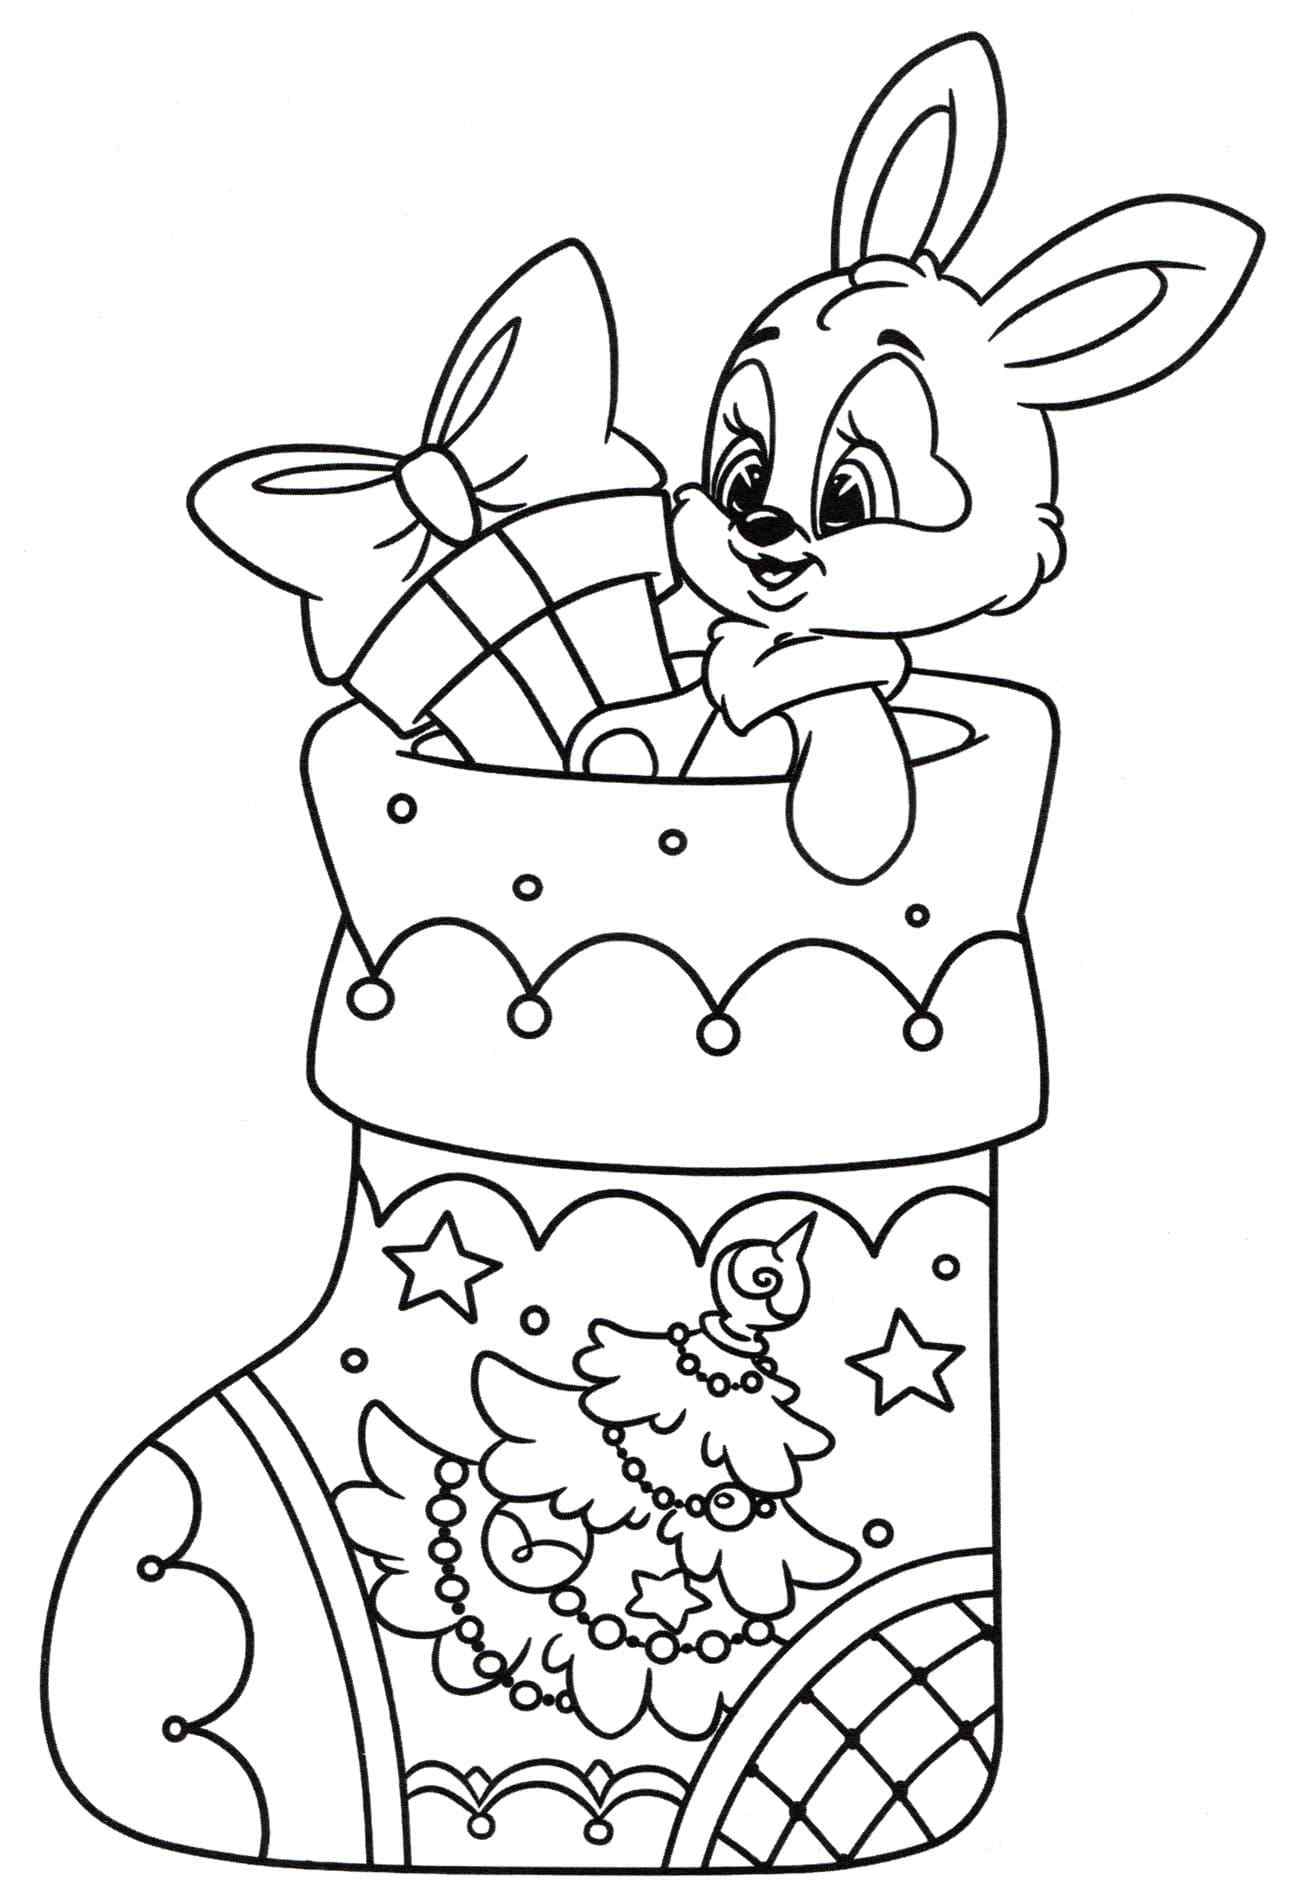 Patterned Sock With Gifts Coloring Page